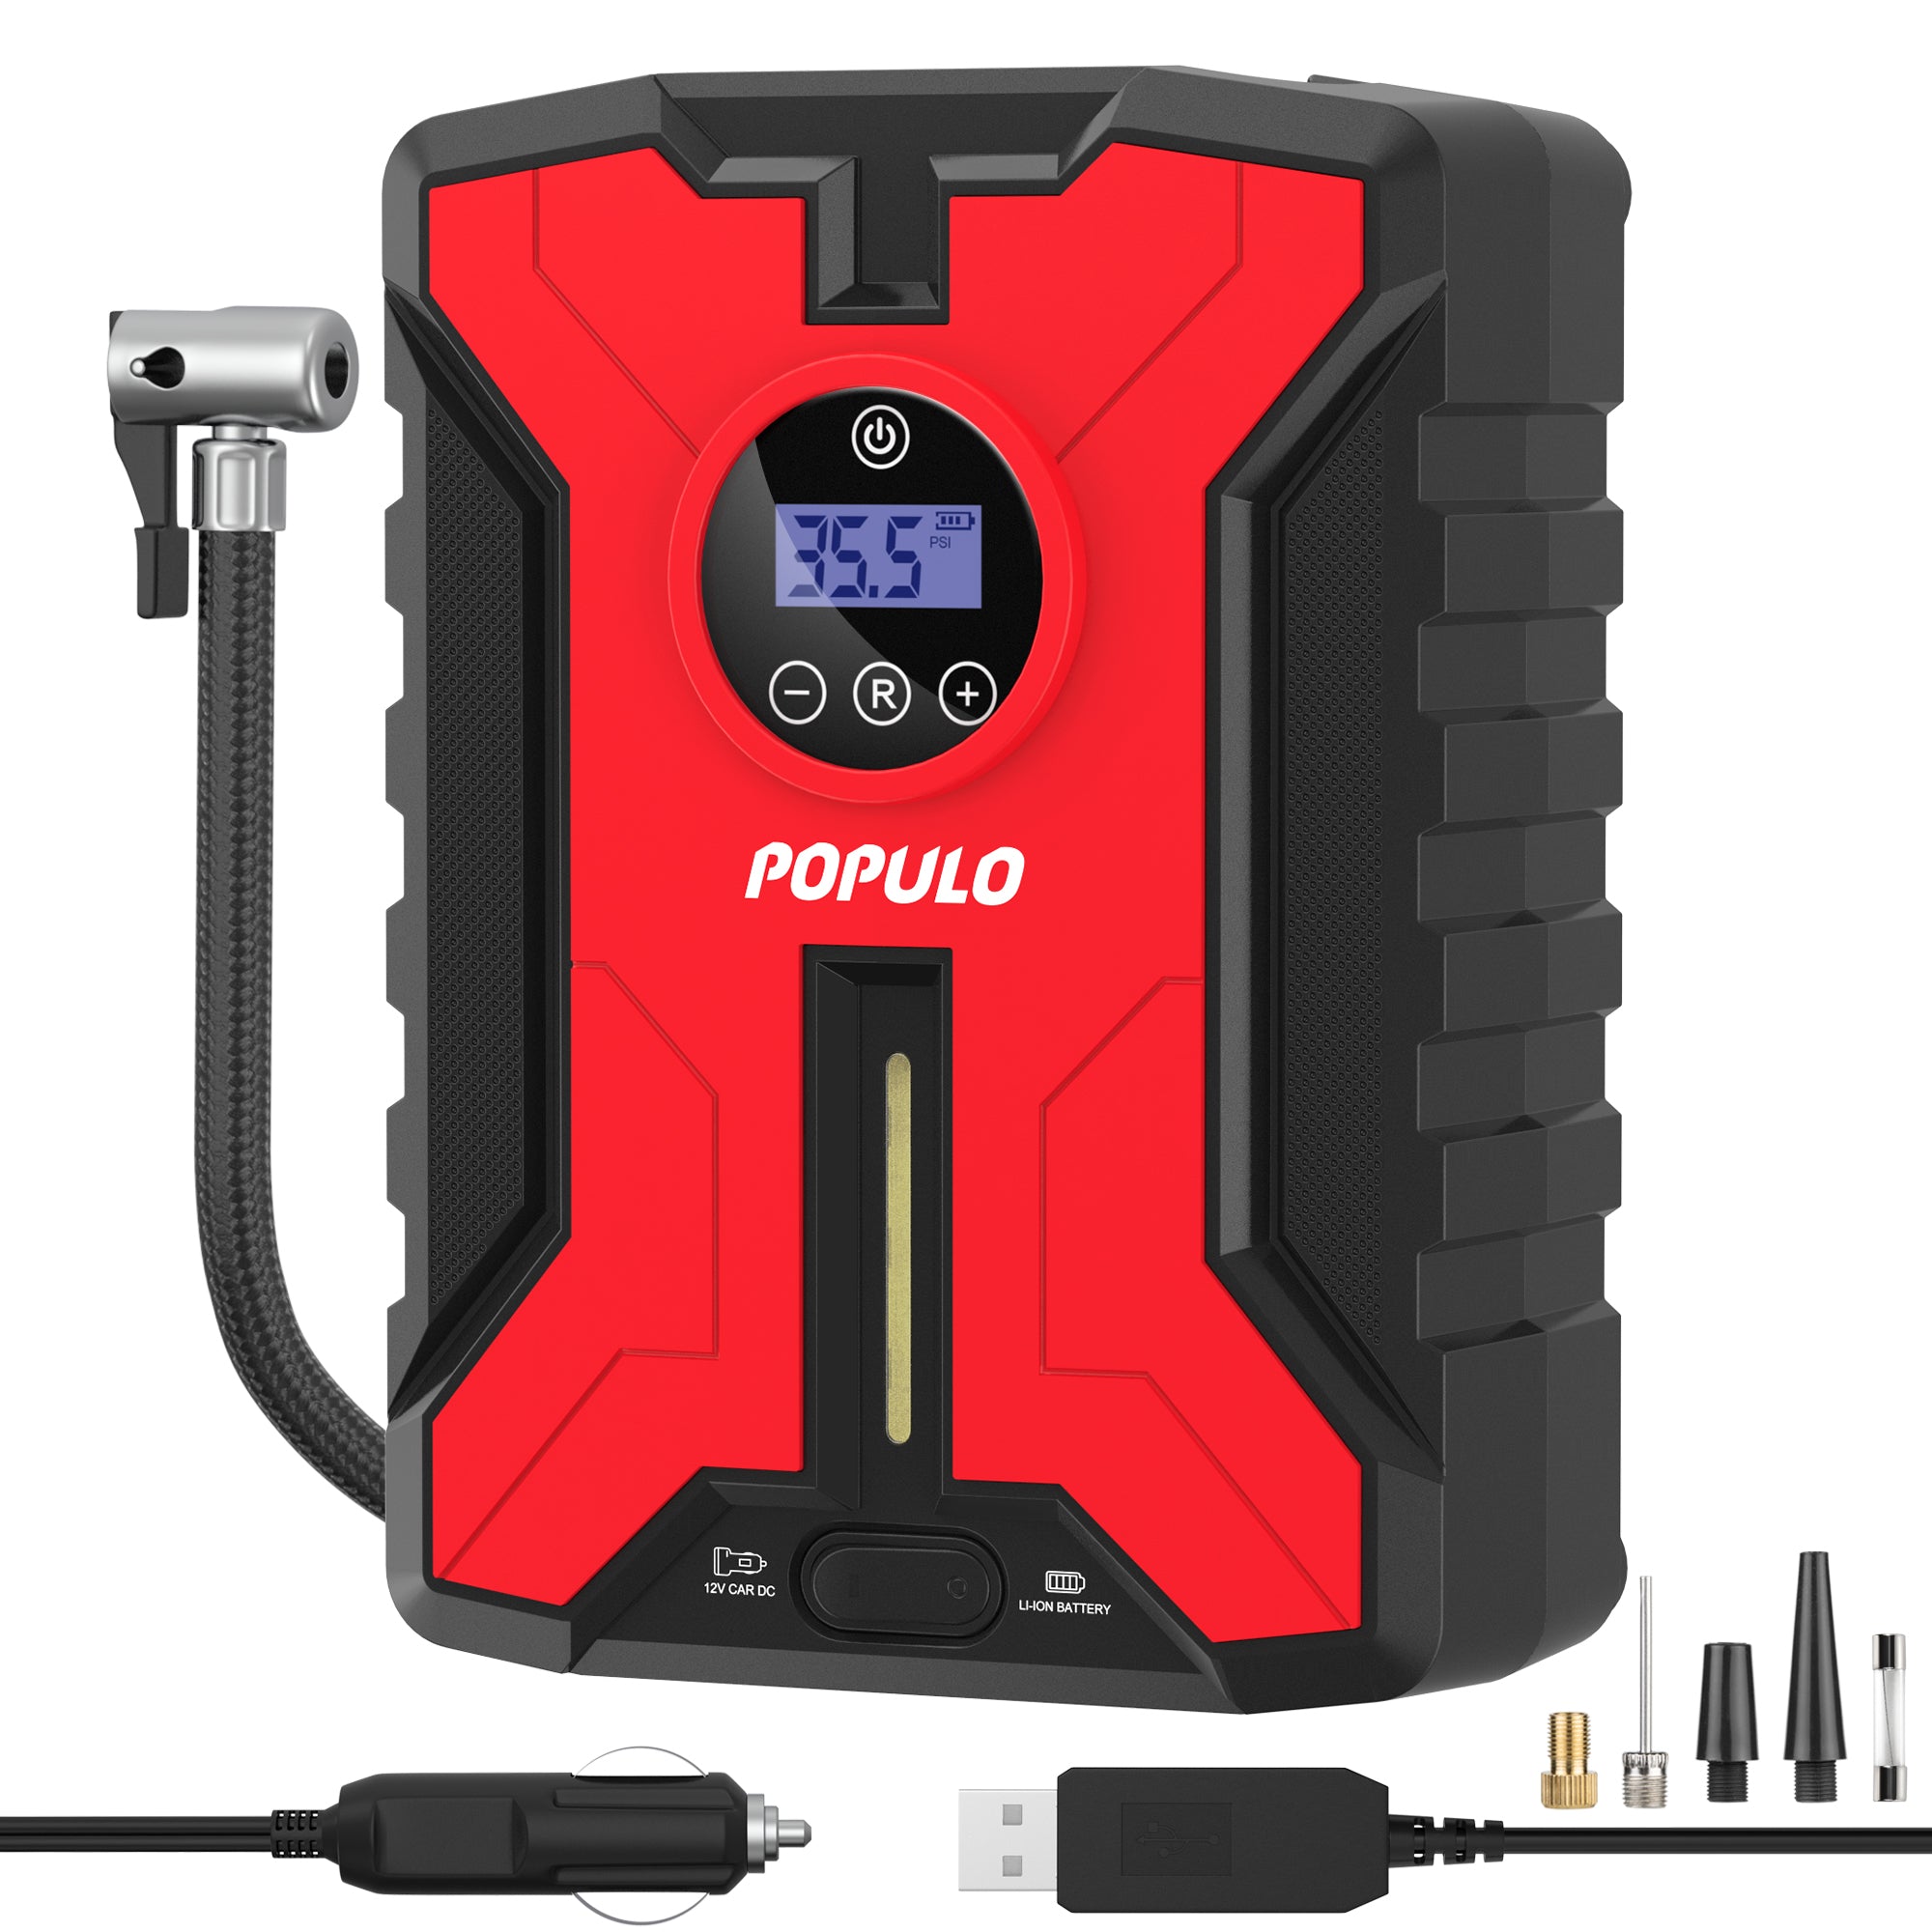  Powools Tire Inflator Portable Air Compressor - Air Pump for  Car Tires by w/Auto-Shutoff, Air Compressor for Car (160PSI), Powerful &  Portable Tire Inflator, Compact Bike Pump, Yellow (PL8768) : Automotive